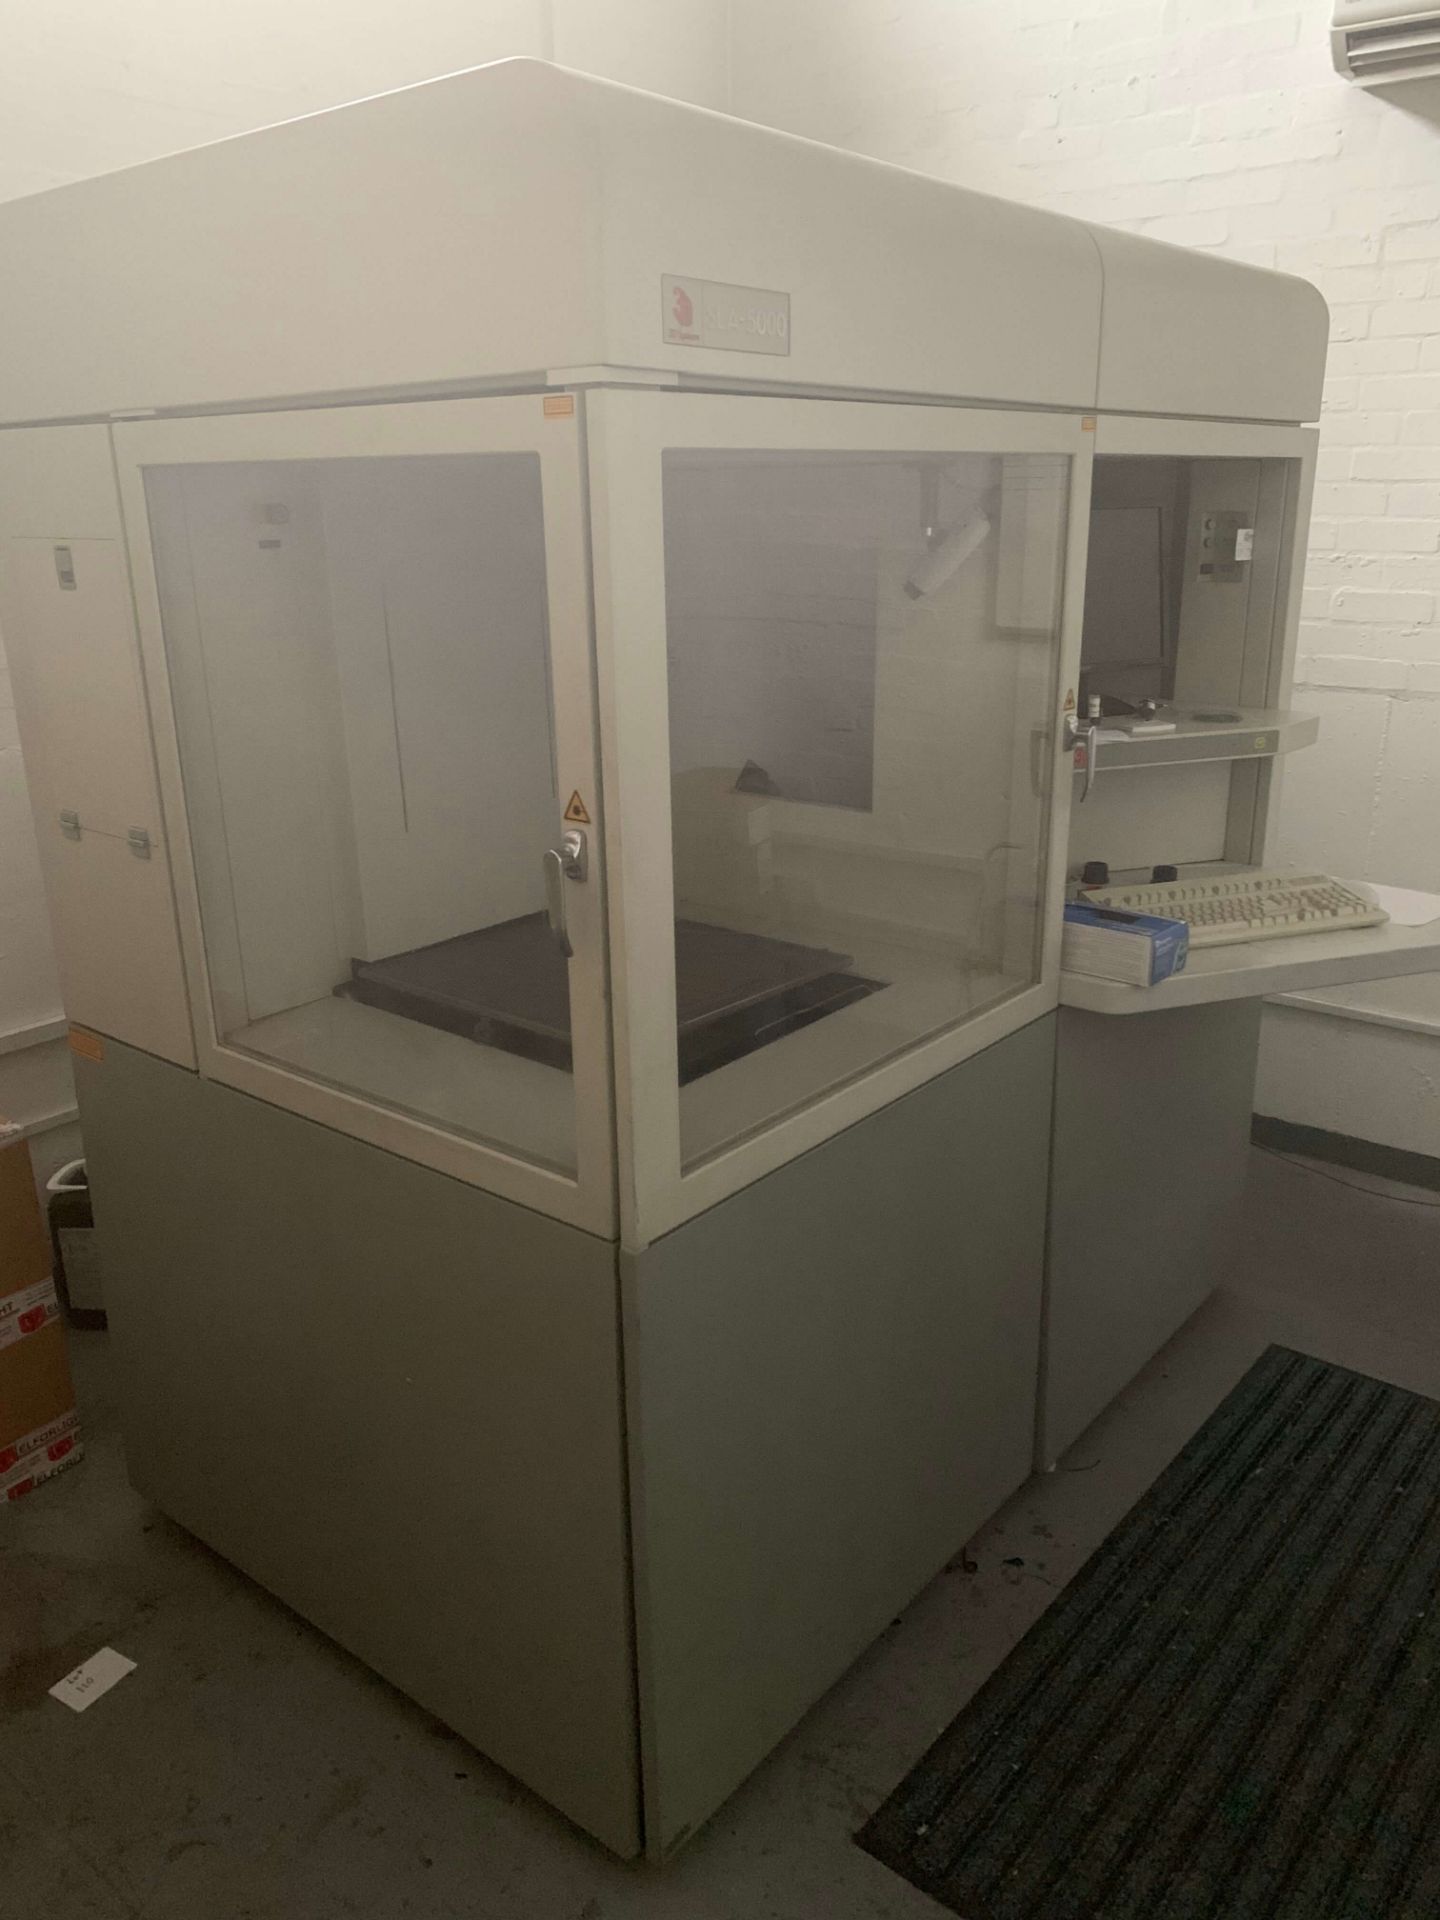 3D Systems SLA5000 500 x 500 x 500mm stereo lithography 3D PRINTER